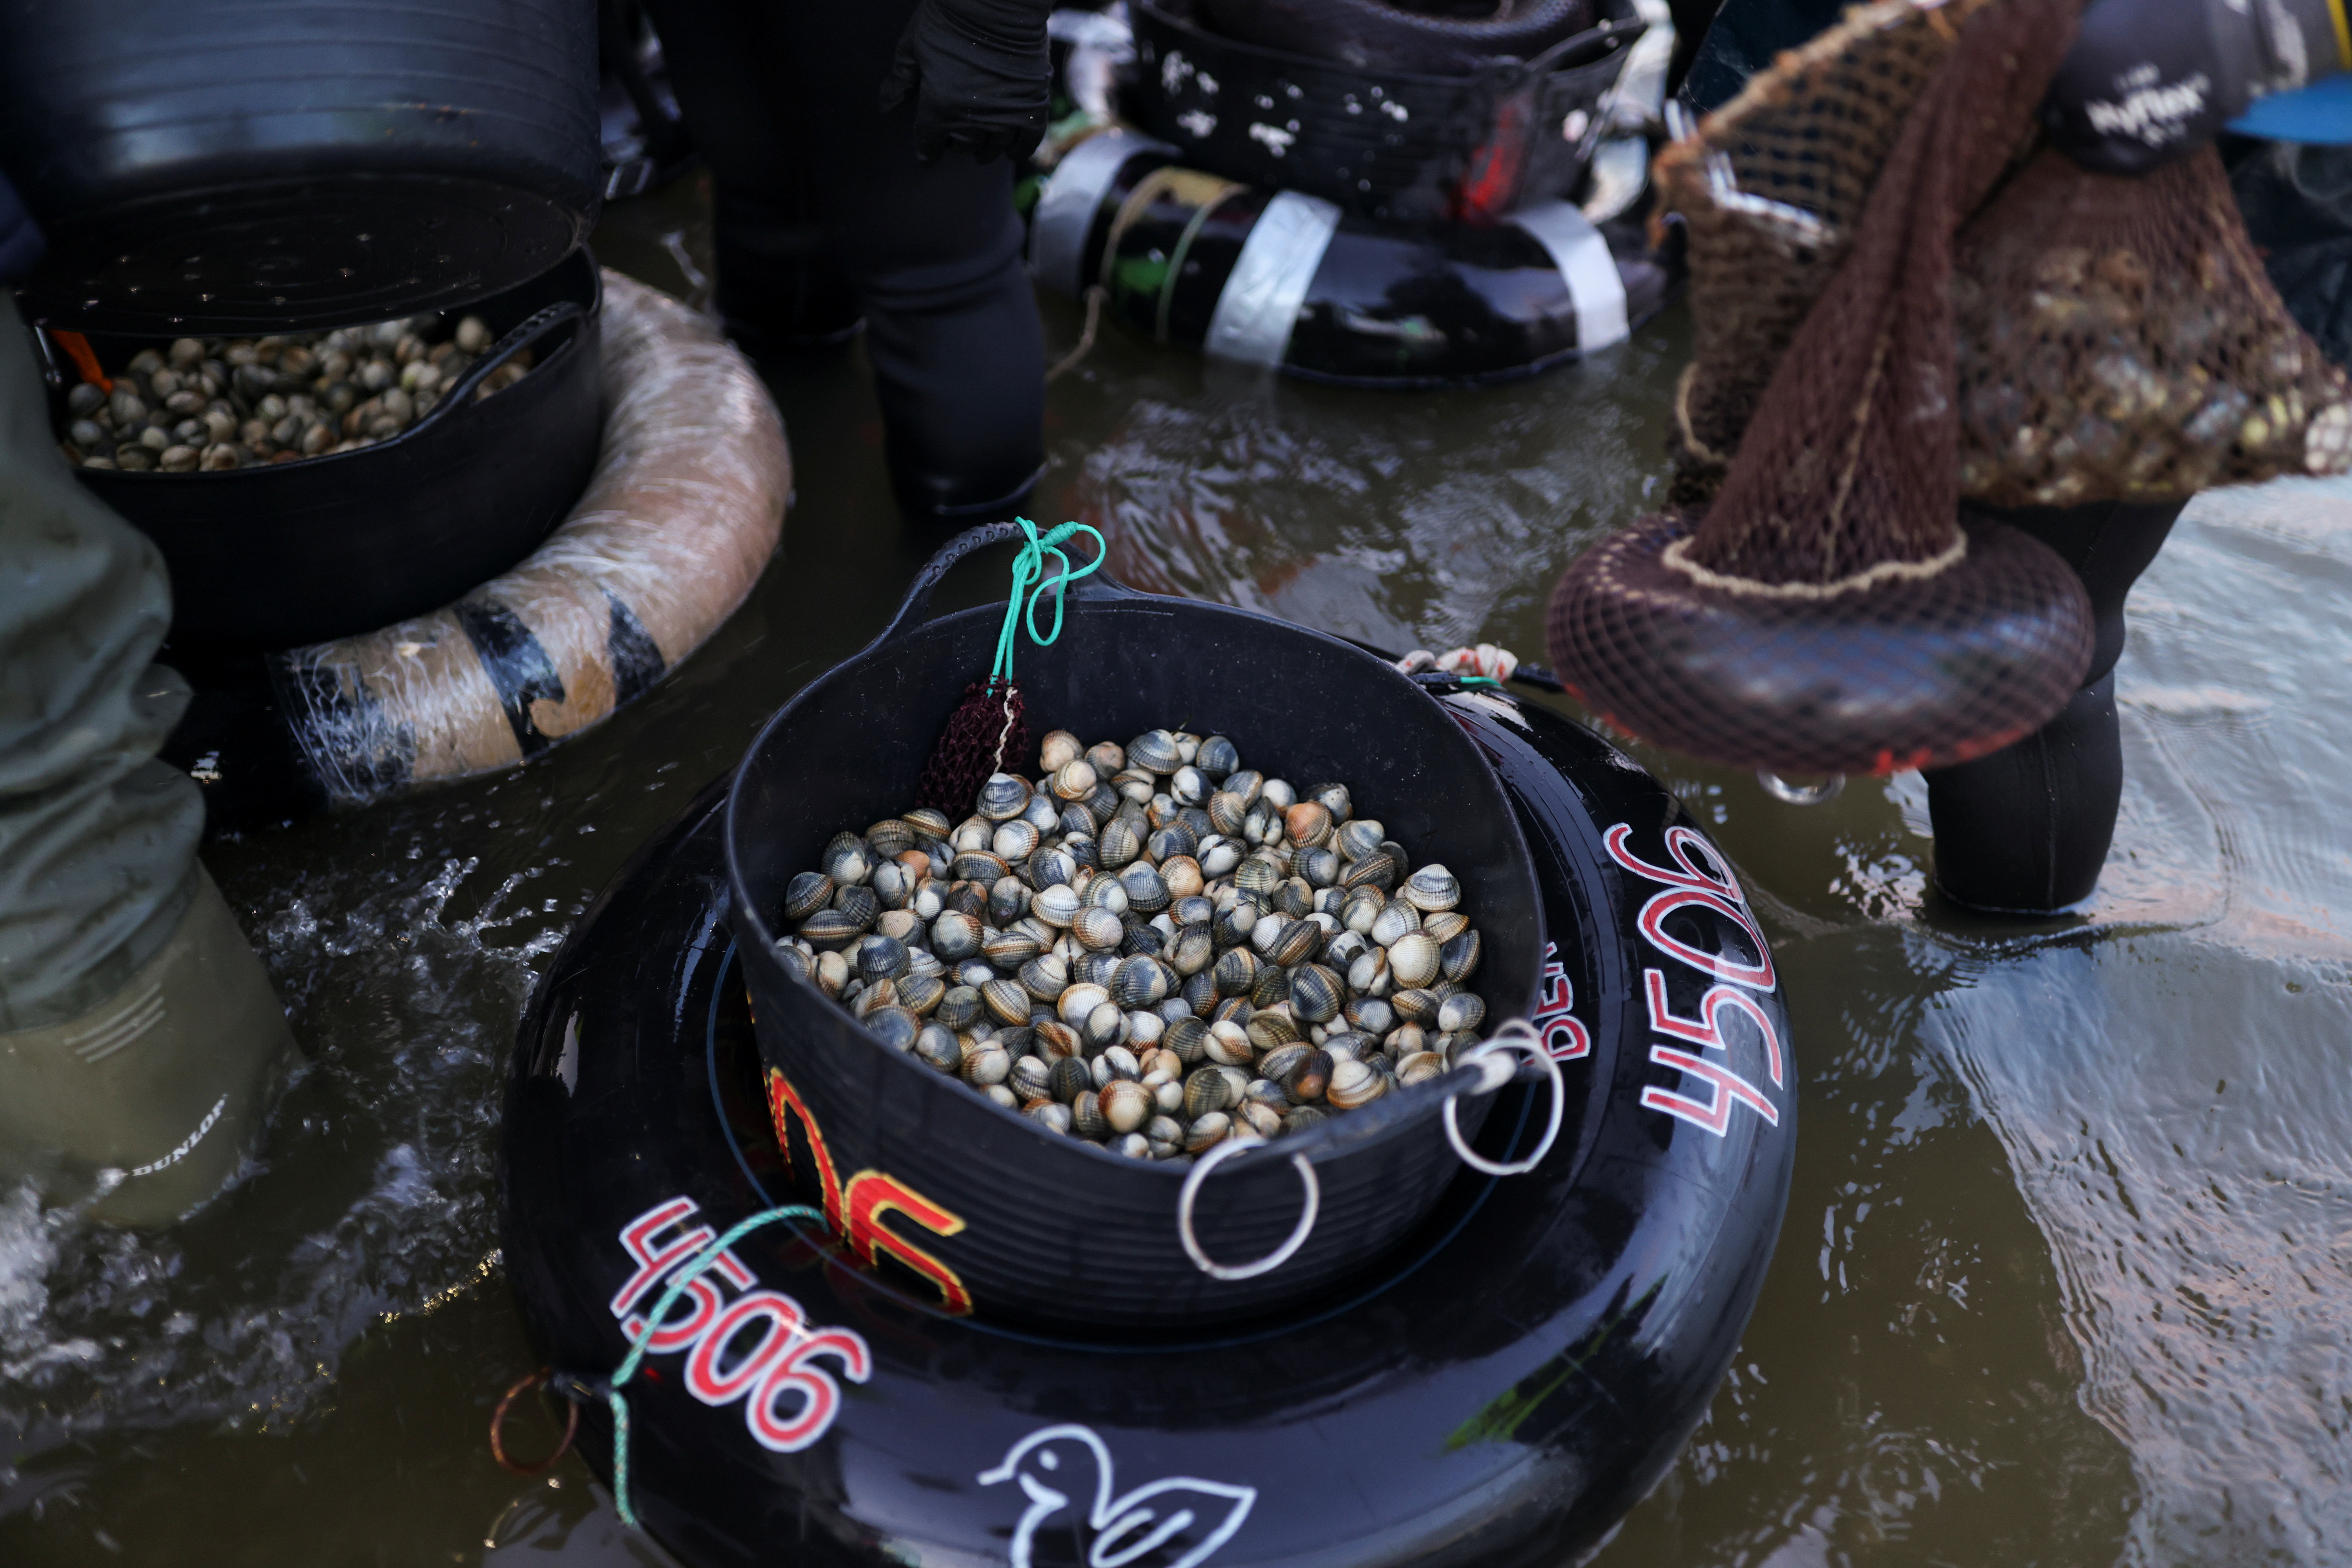 Shellfisherwomen carry cockles in buckets and clams in net sacks before weighing them in the Noia estuary, where more or less 4000 shellfisherwomen work on foot along the inlets of the Spanish region of Galicia, Spain, November 16, 2021. REUTERS/Nacho Doce